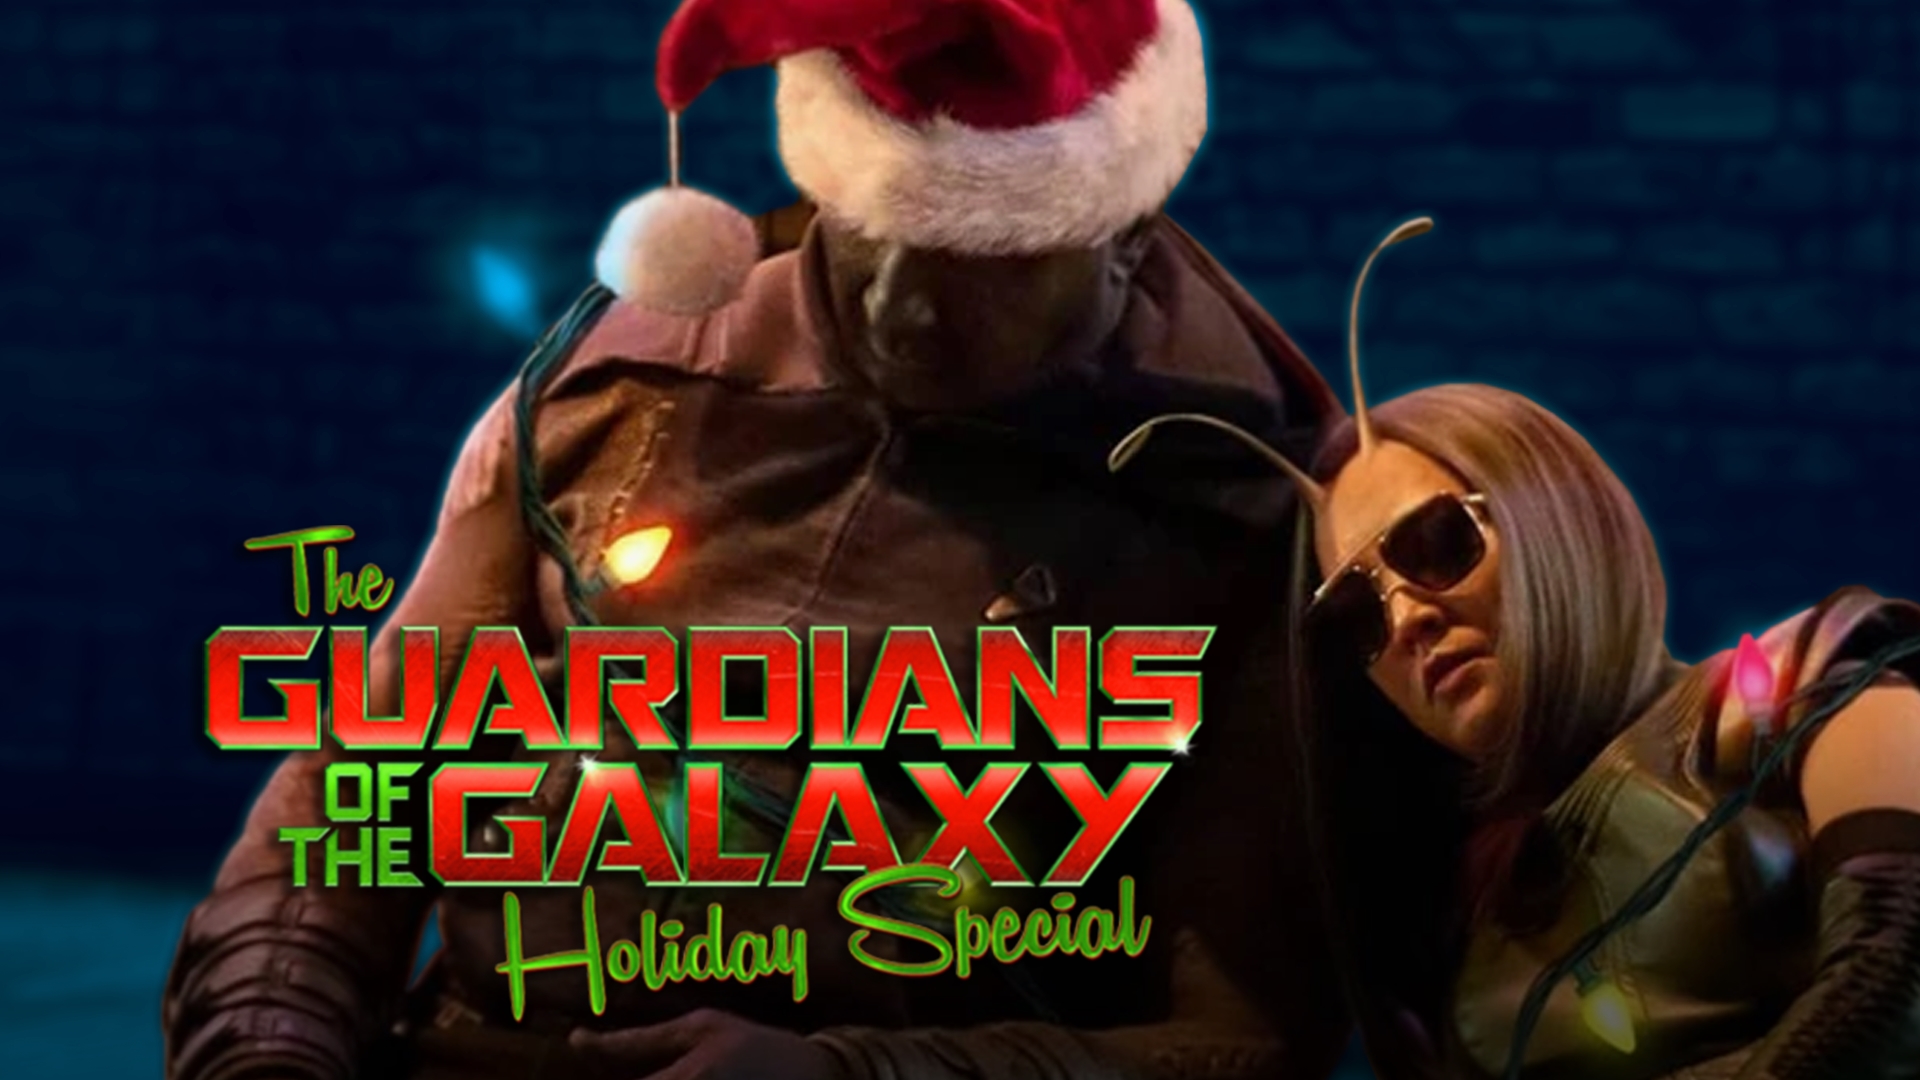 The Guardians of the Galaxy get goofy for Christmas